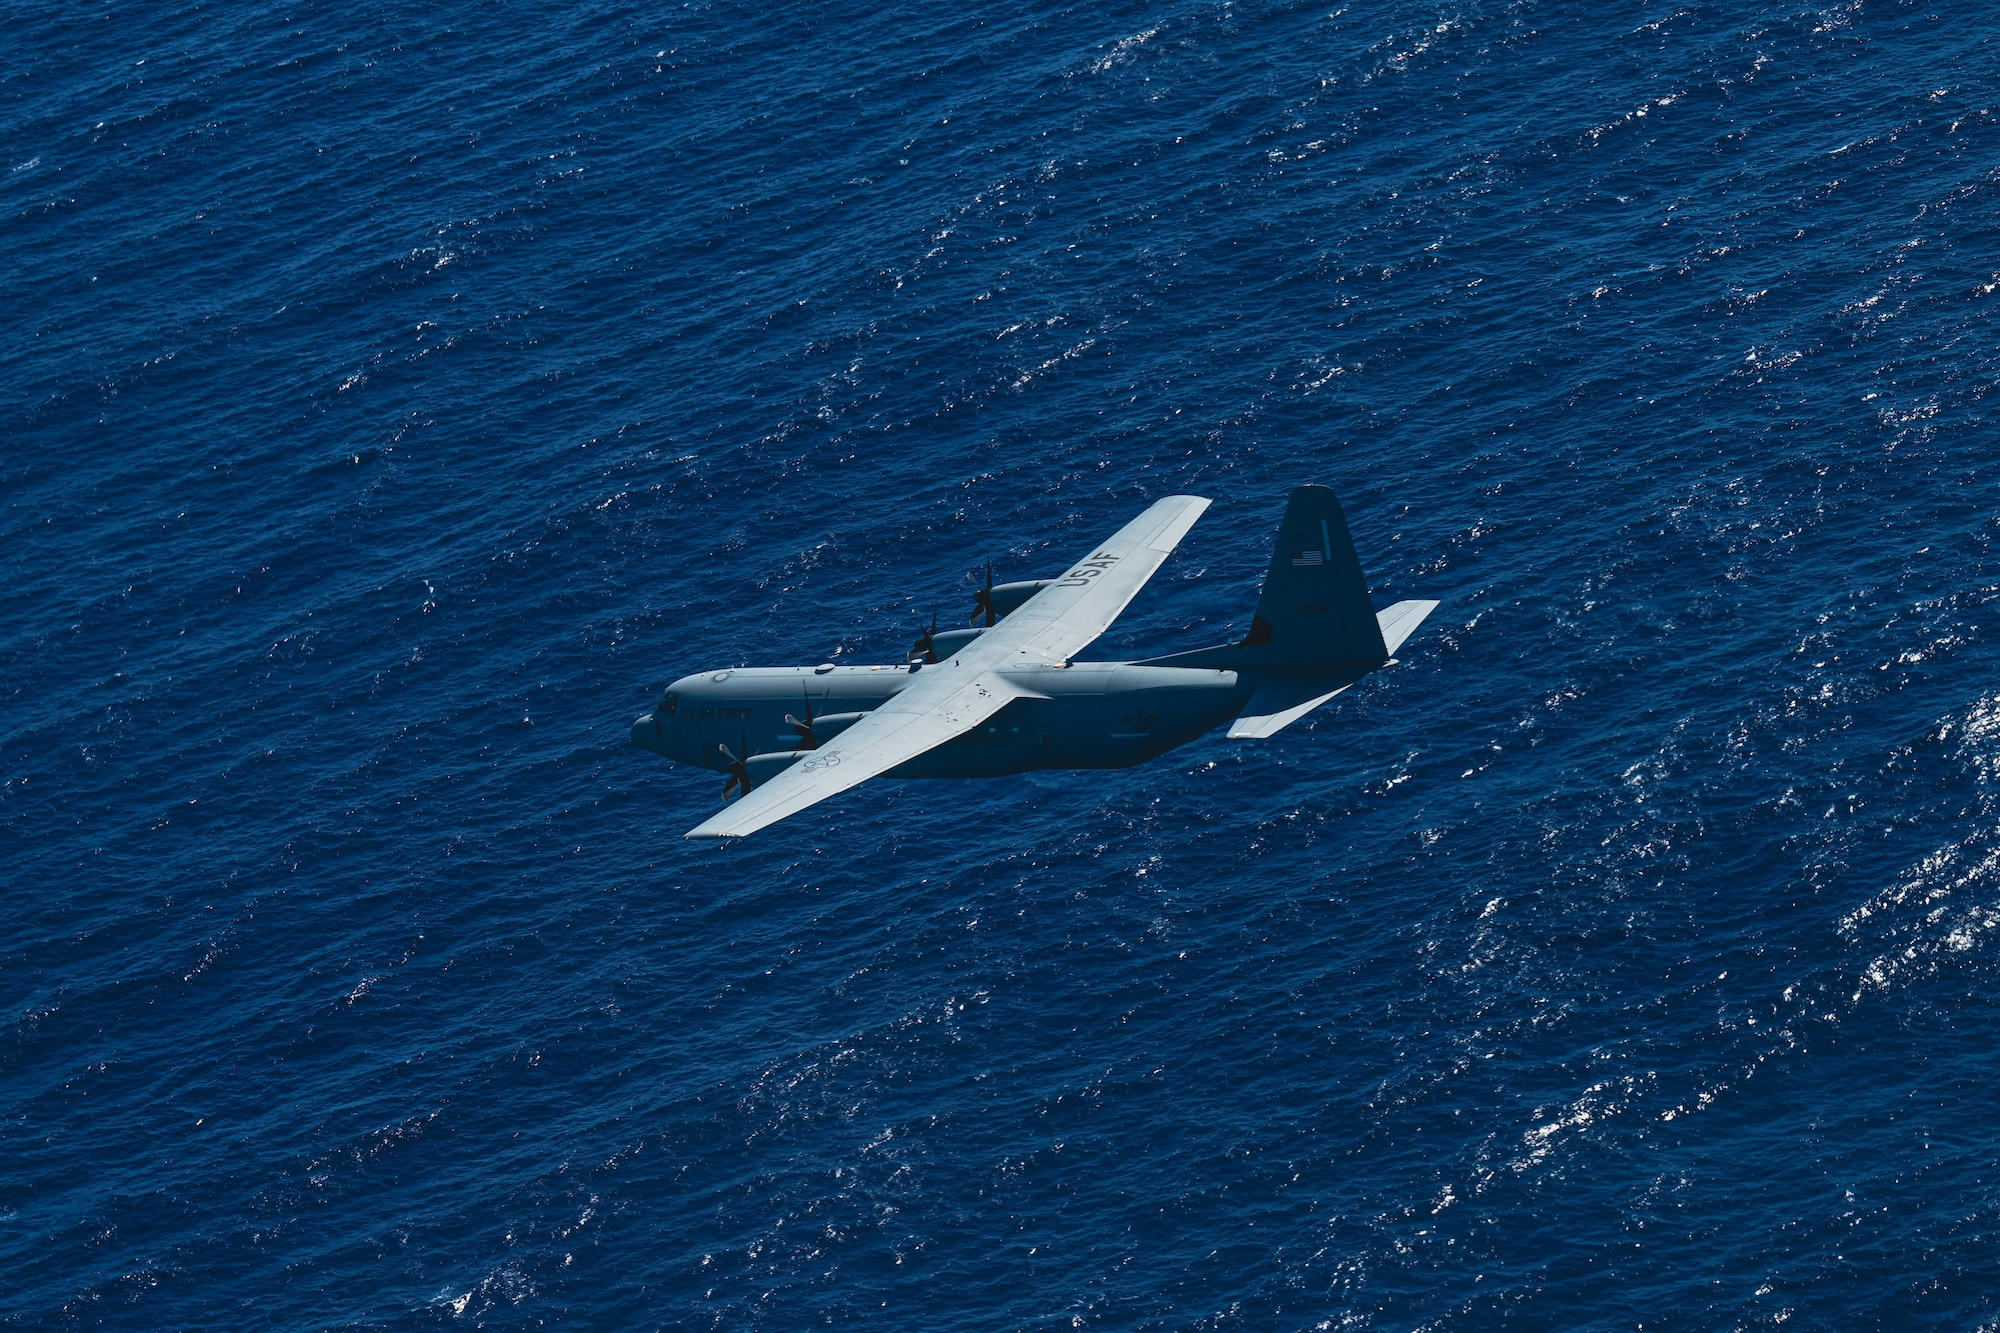 A C-130J aircraft soars over open waters.